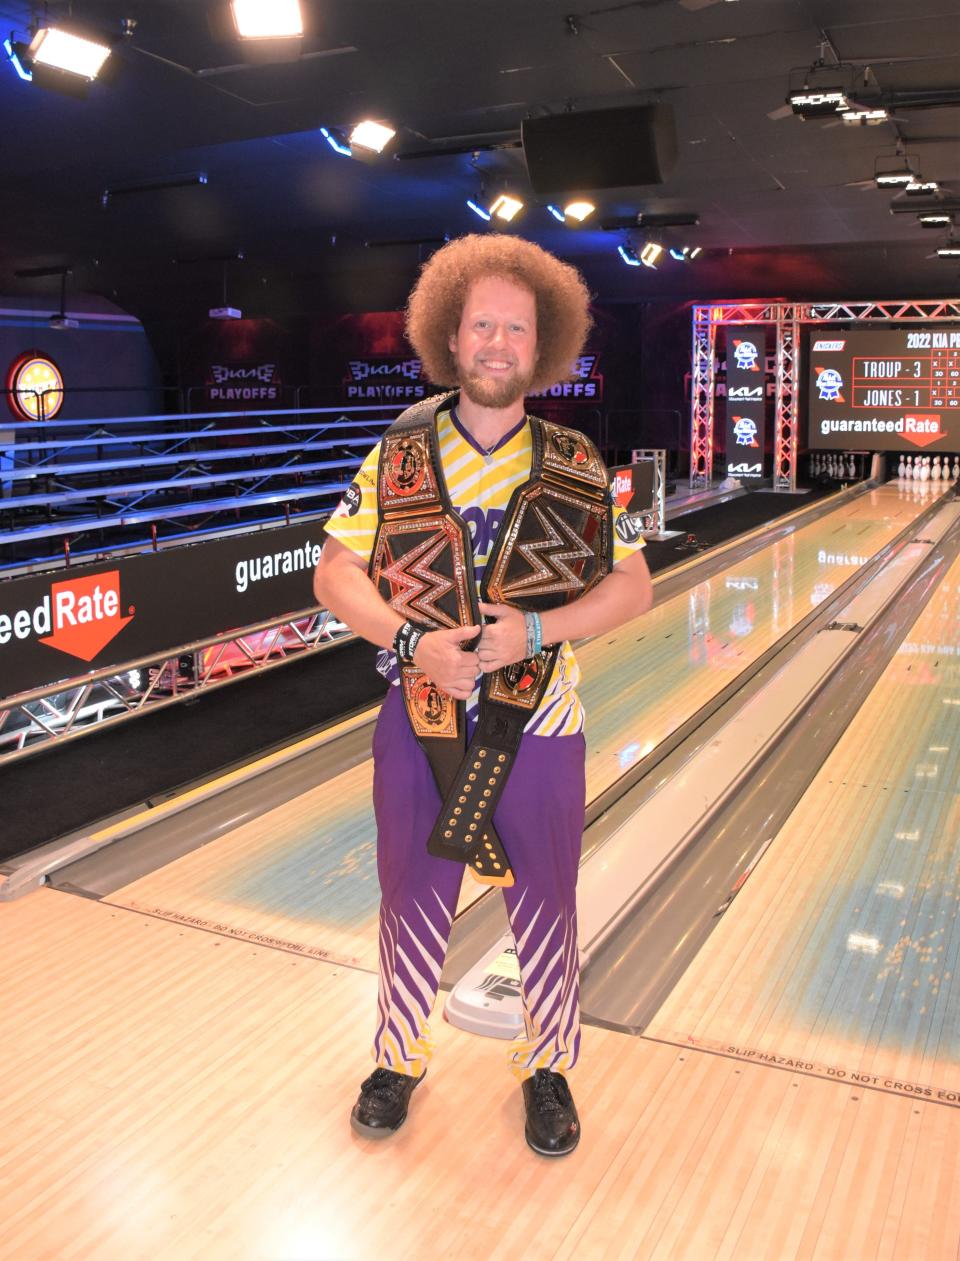 PBA bowler Kyle Troup poses with his WWE-style belts in celebration of his successful title defense Sunday, having defeated Tommy Jones to win his ninth career title on May 15, 2022.